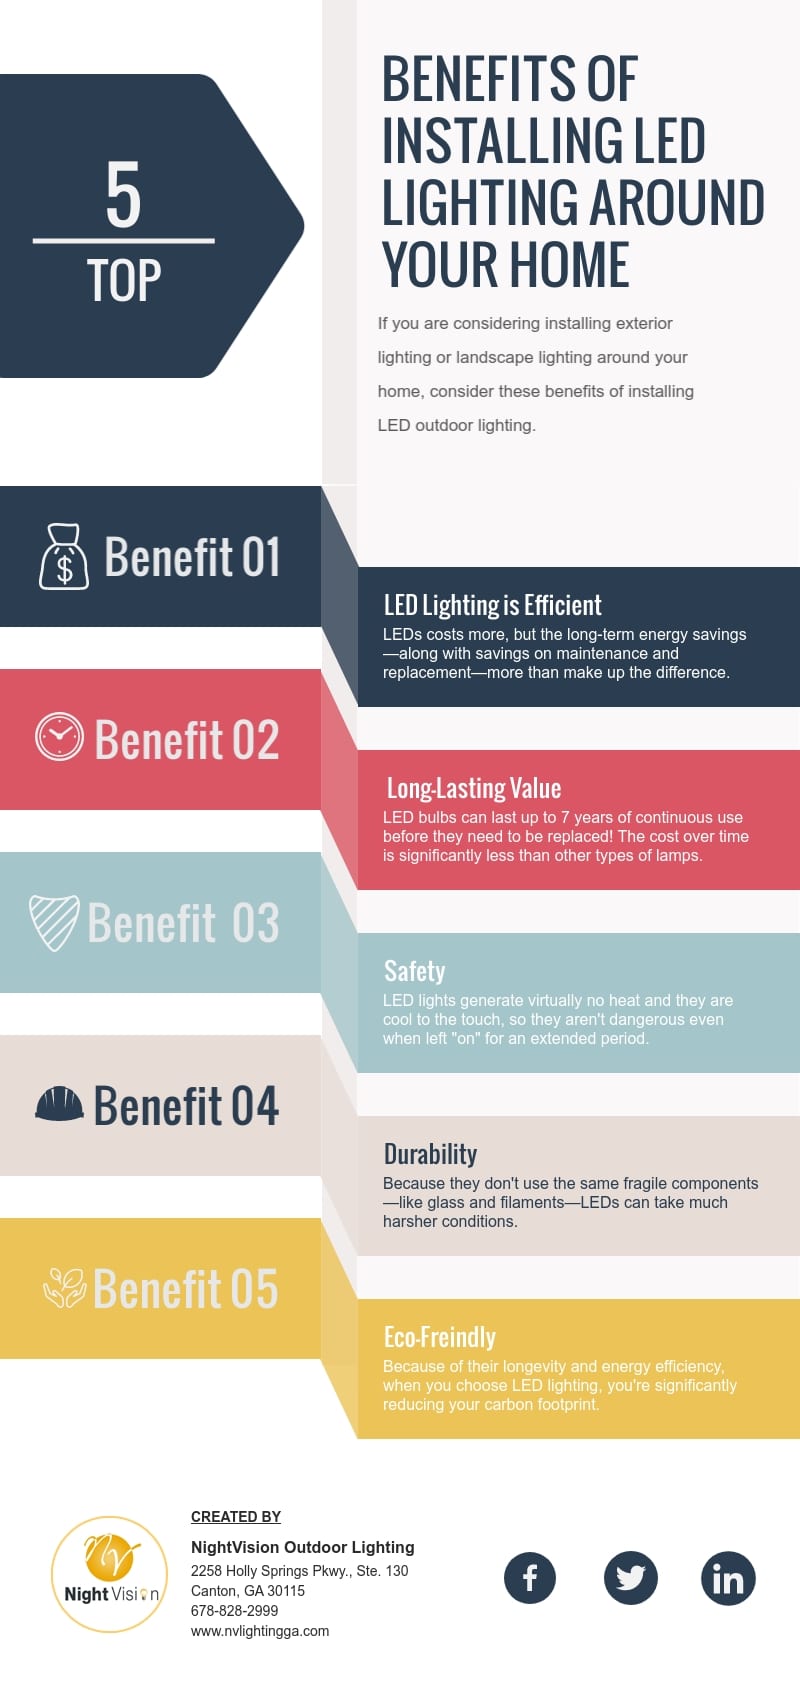 Top 5 Benefits of Installing LED Lighting Around Your Home [inofgraphic]